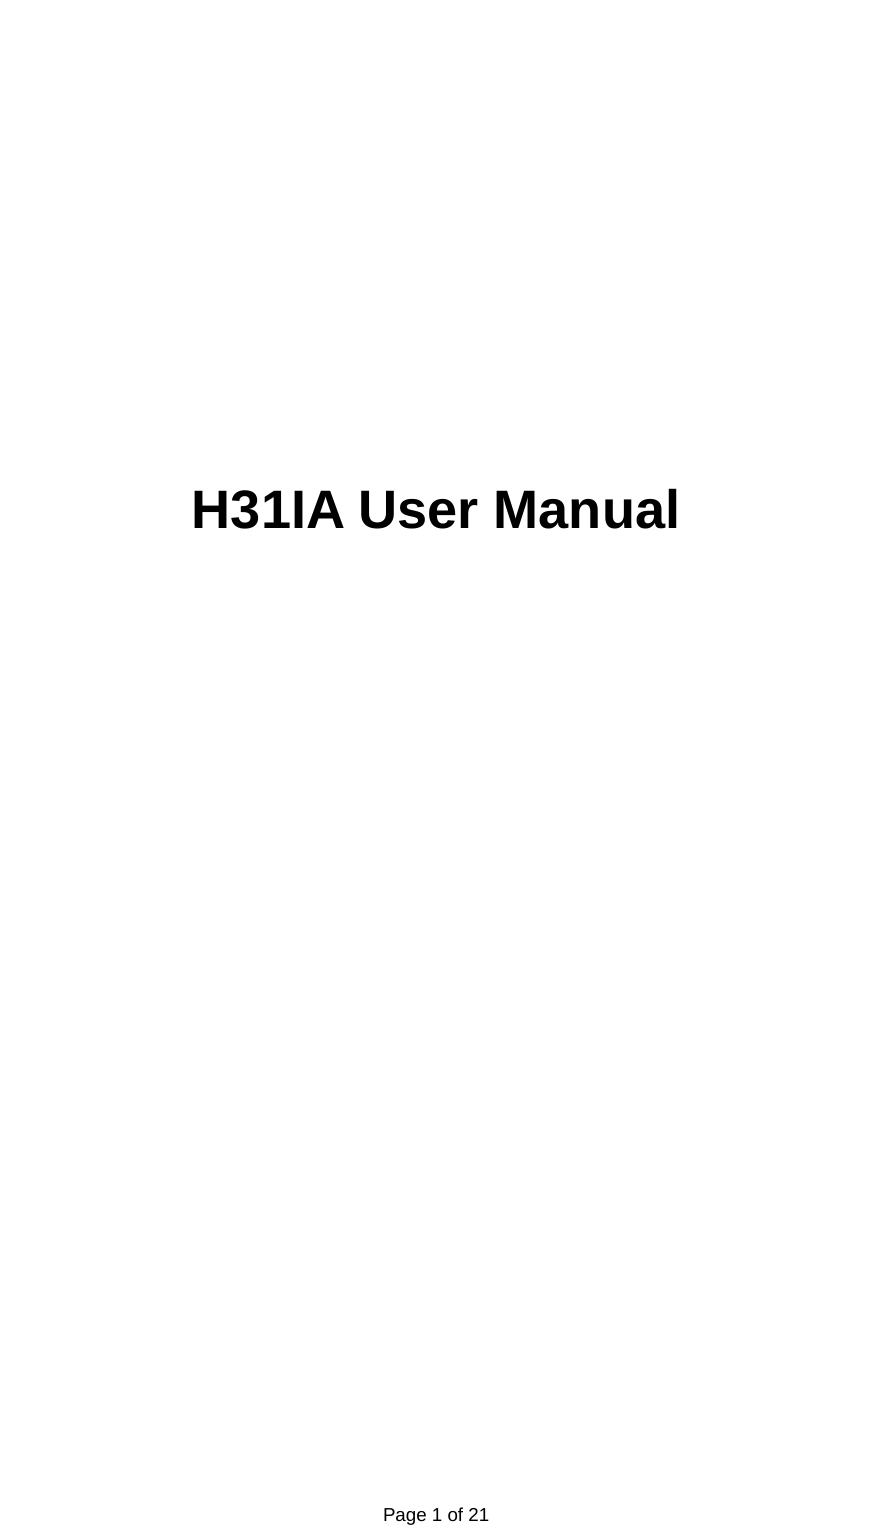   Page 1 of 21               H31IA User Manual                           